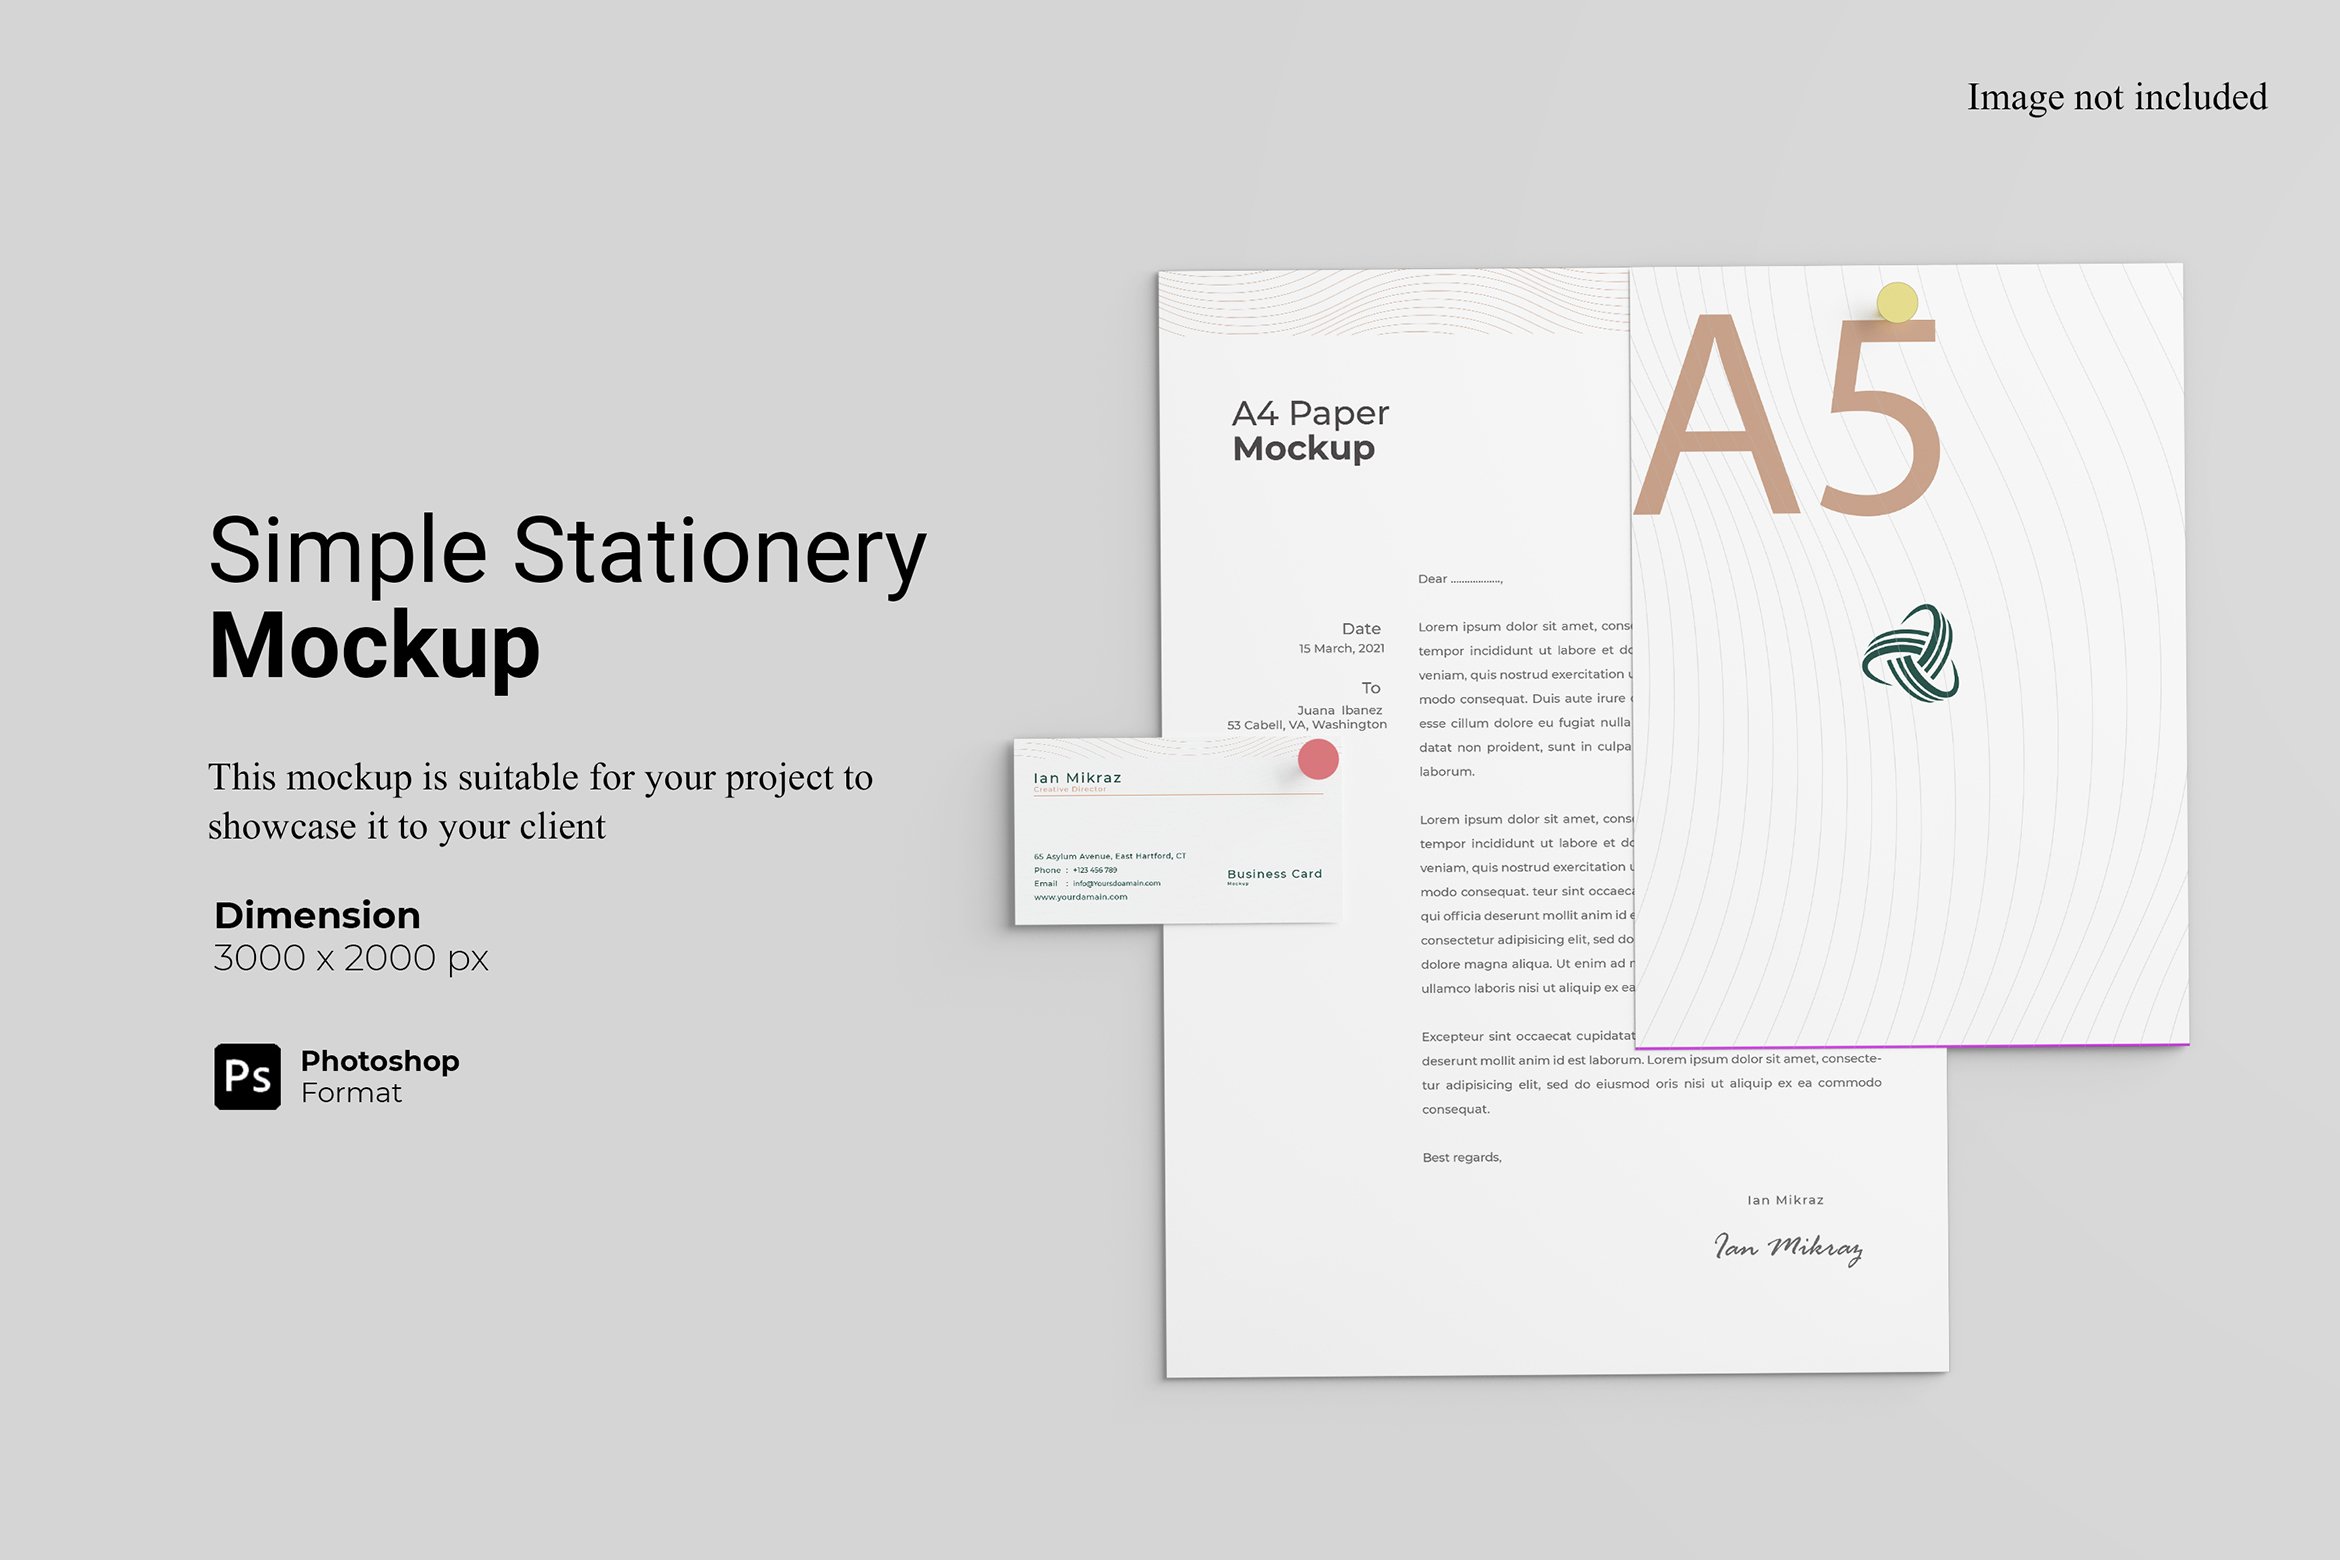 Simple Stationery Mockup cover image.